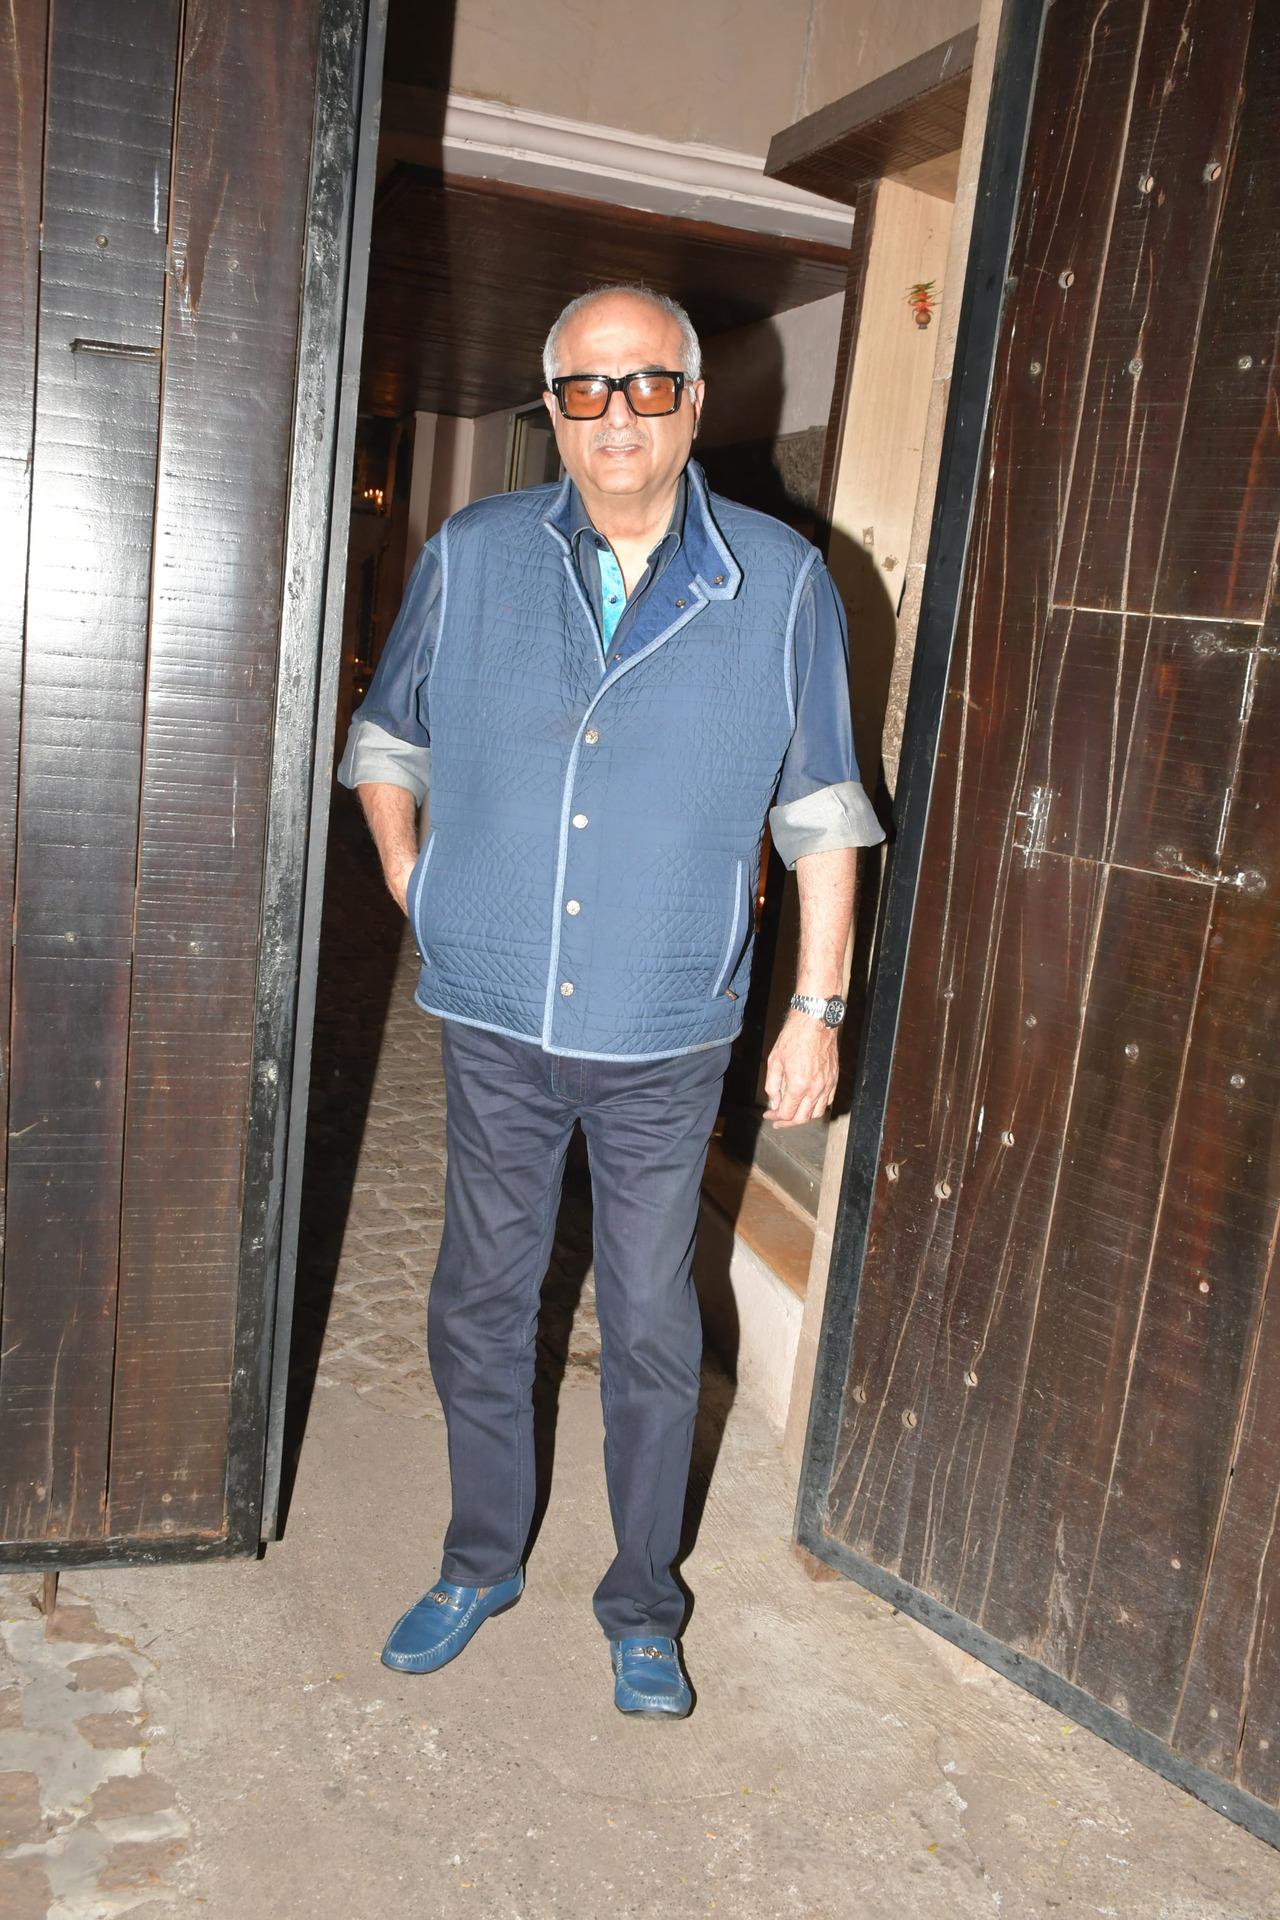 Film producer Boney Kapoor who shares a close bond with Javed Akhtar and Shabana Azmi sported an all-denim look with a pair of cool sunglasses